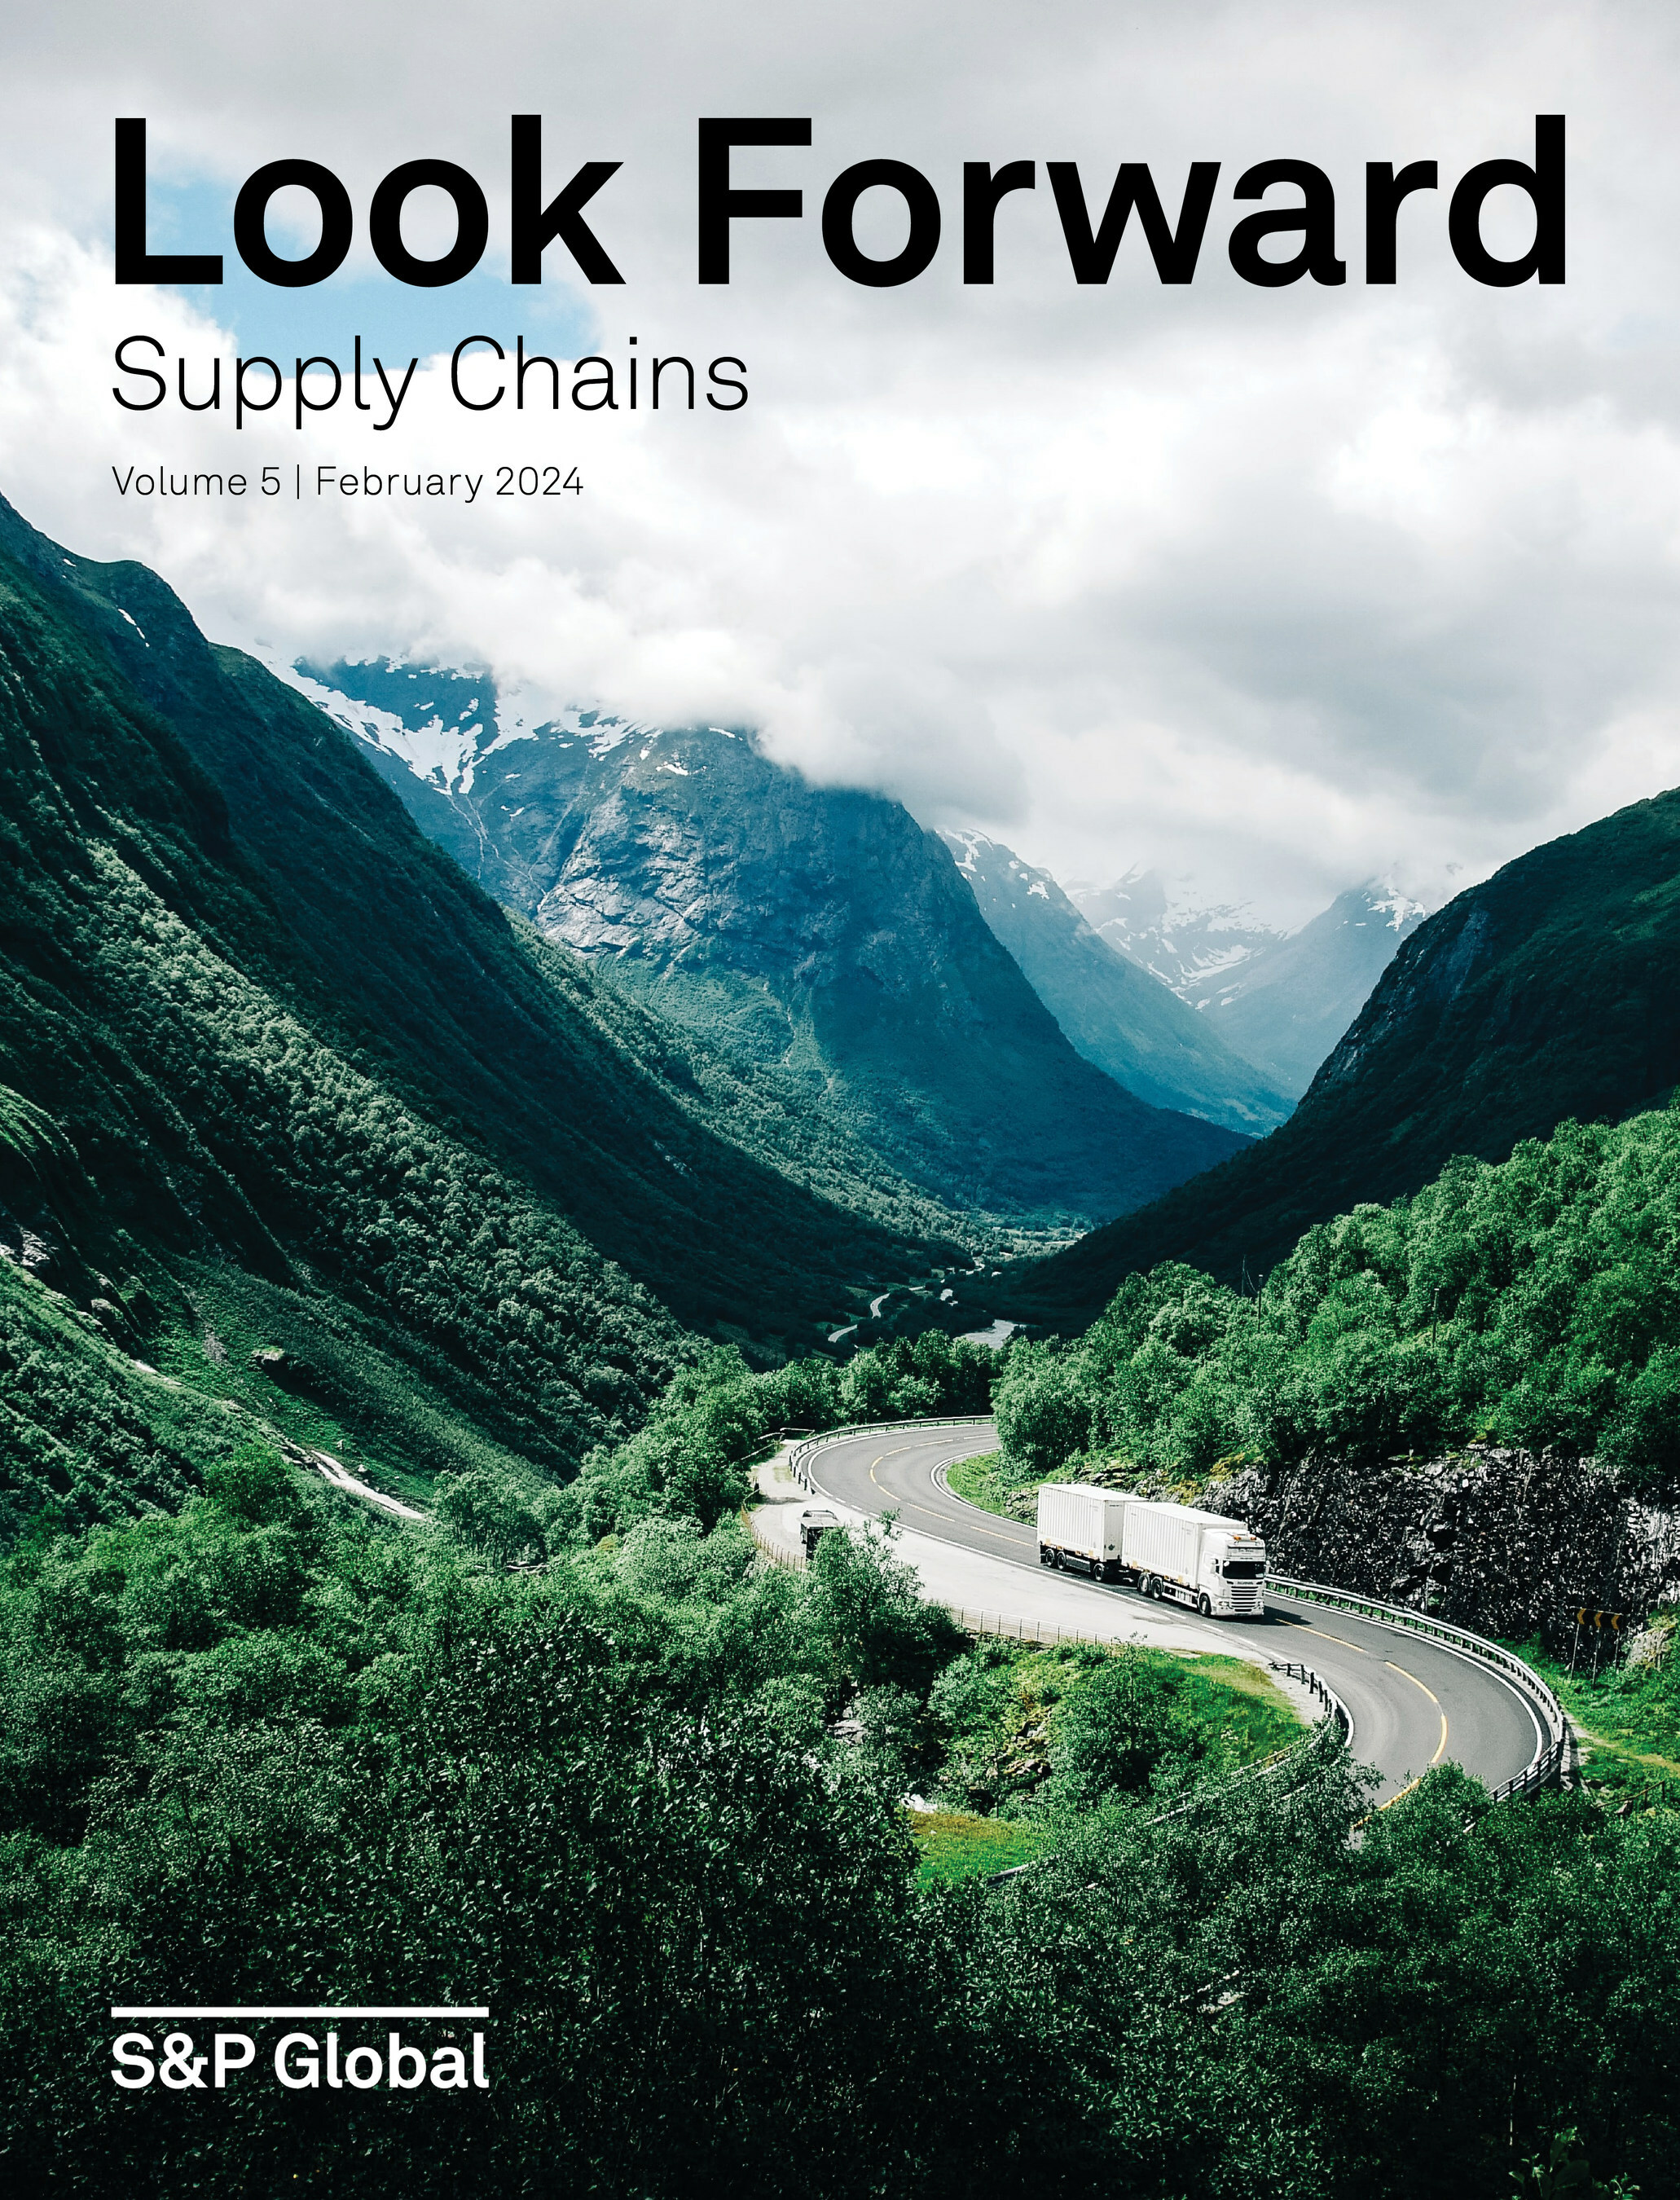 The latest installment of the Look Forward Research Series by S&P Global presents valuable insights into the future of global supply chains, offering a comprehensive analysis of upcoming trends and developments.